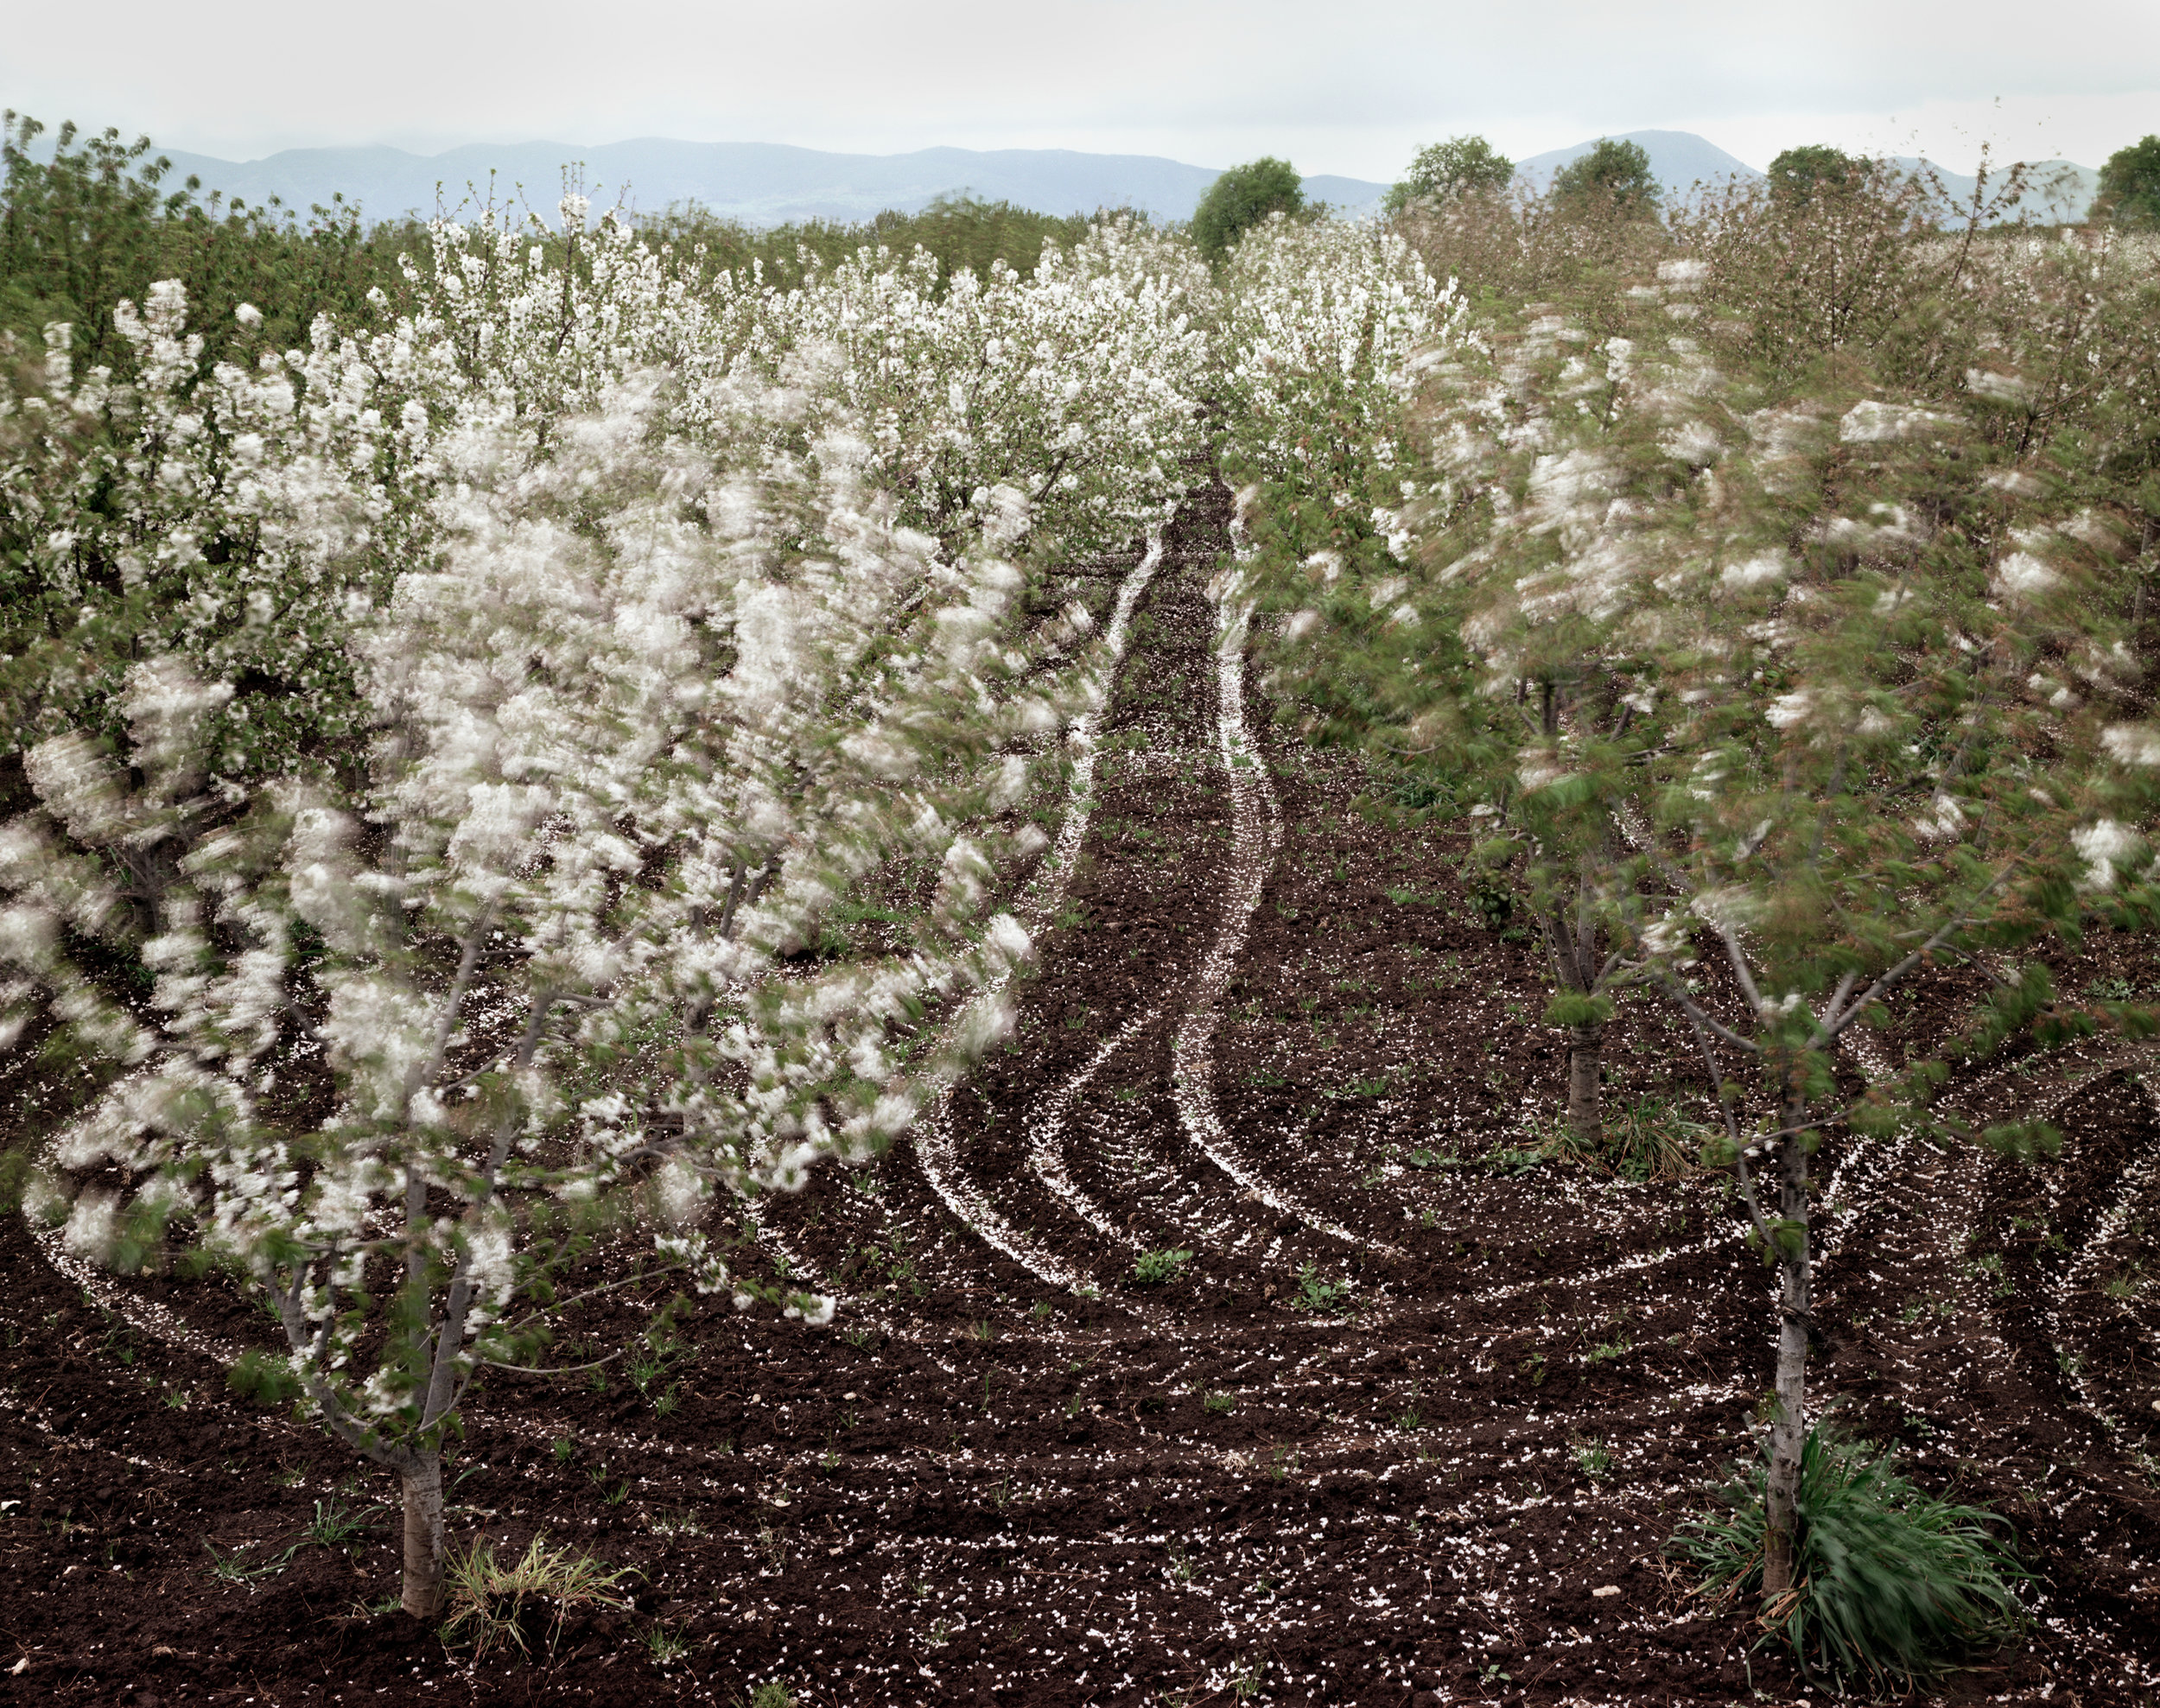  Cherry trees blooming, Sparanise, Italy, 1994 